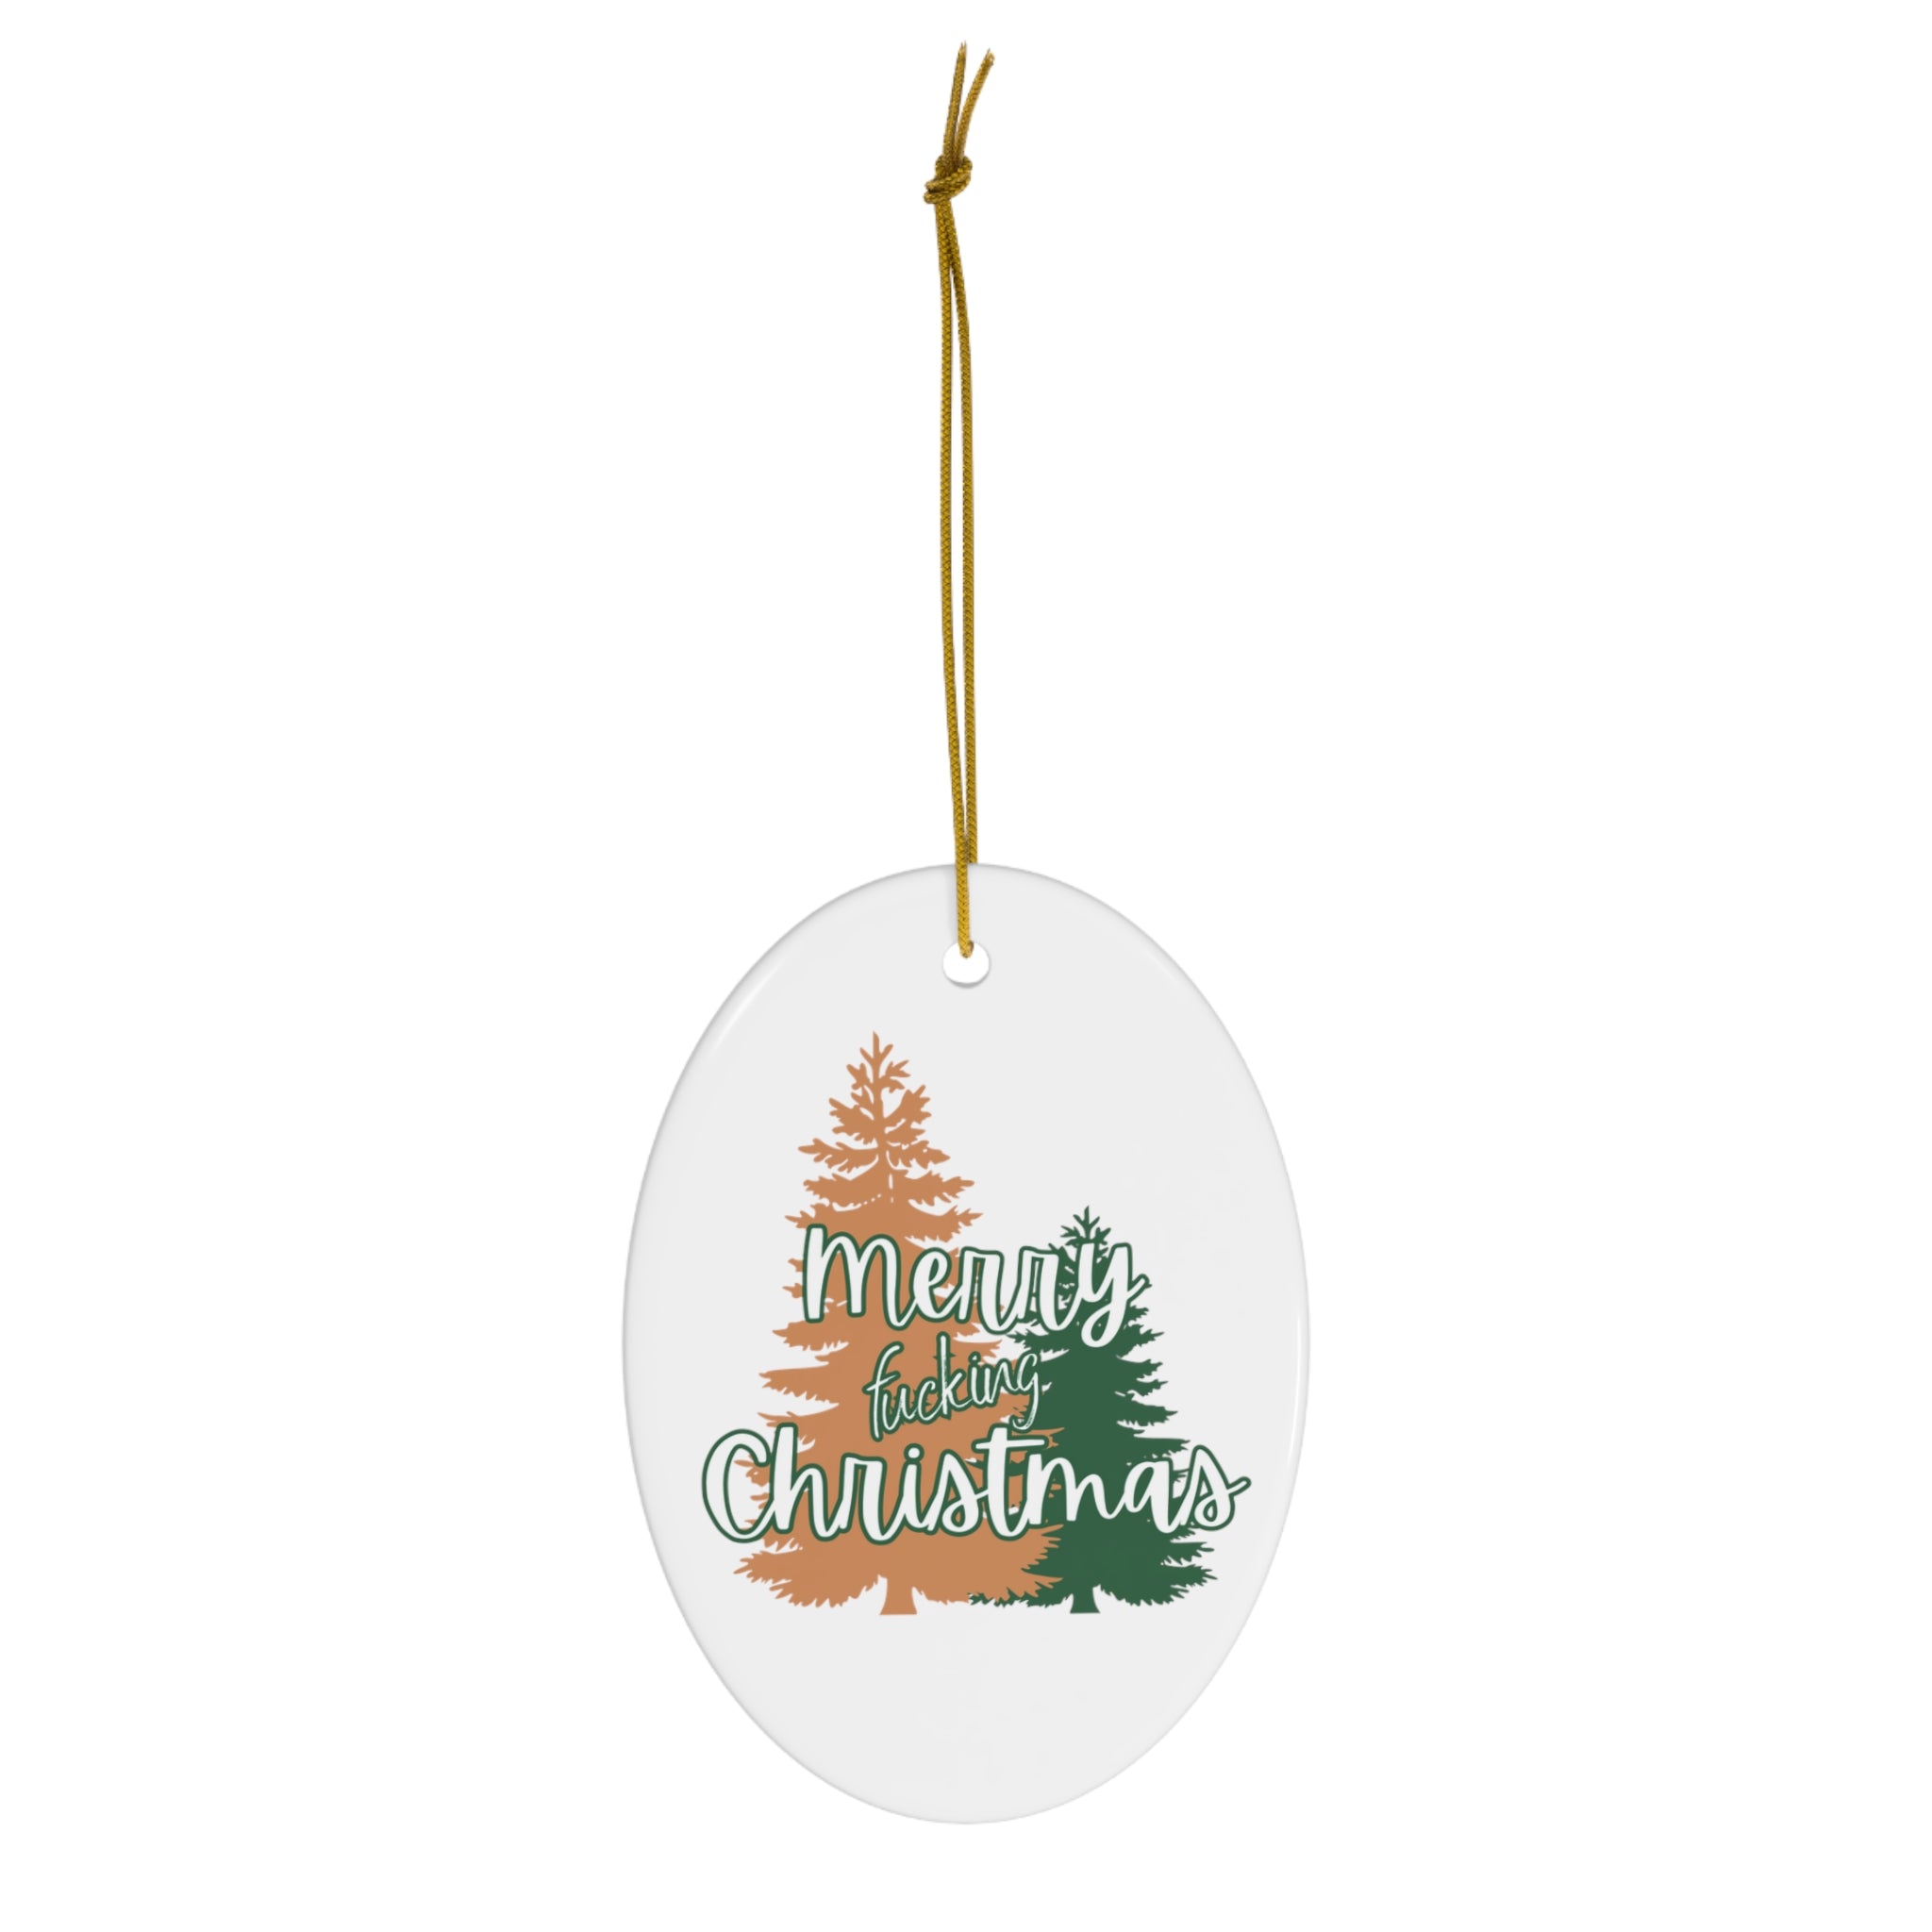  Merry Fucking Christmas (Green and Gold Trees) Ceramic Ornament, Sweary Christmas Ornament, Funny Porcelain Decoration, Holiday Decor Home DecorOvalOneSize